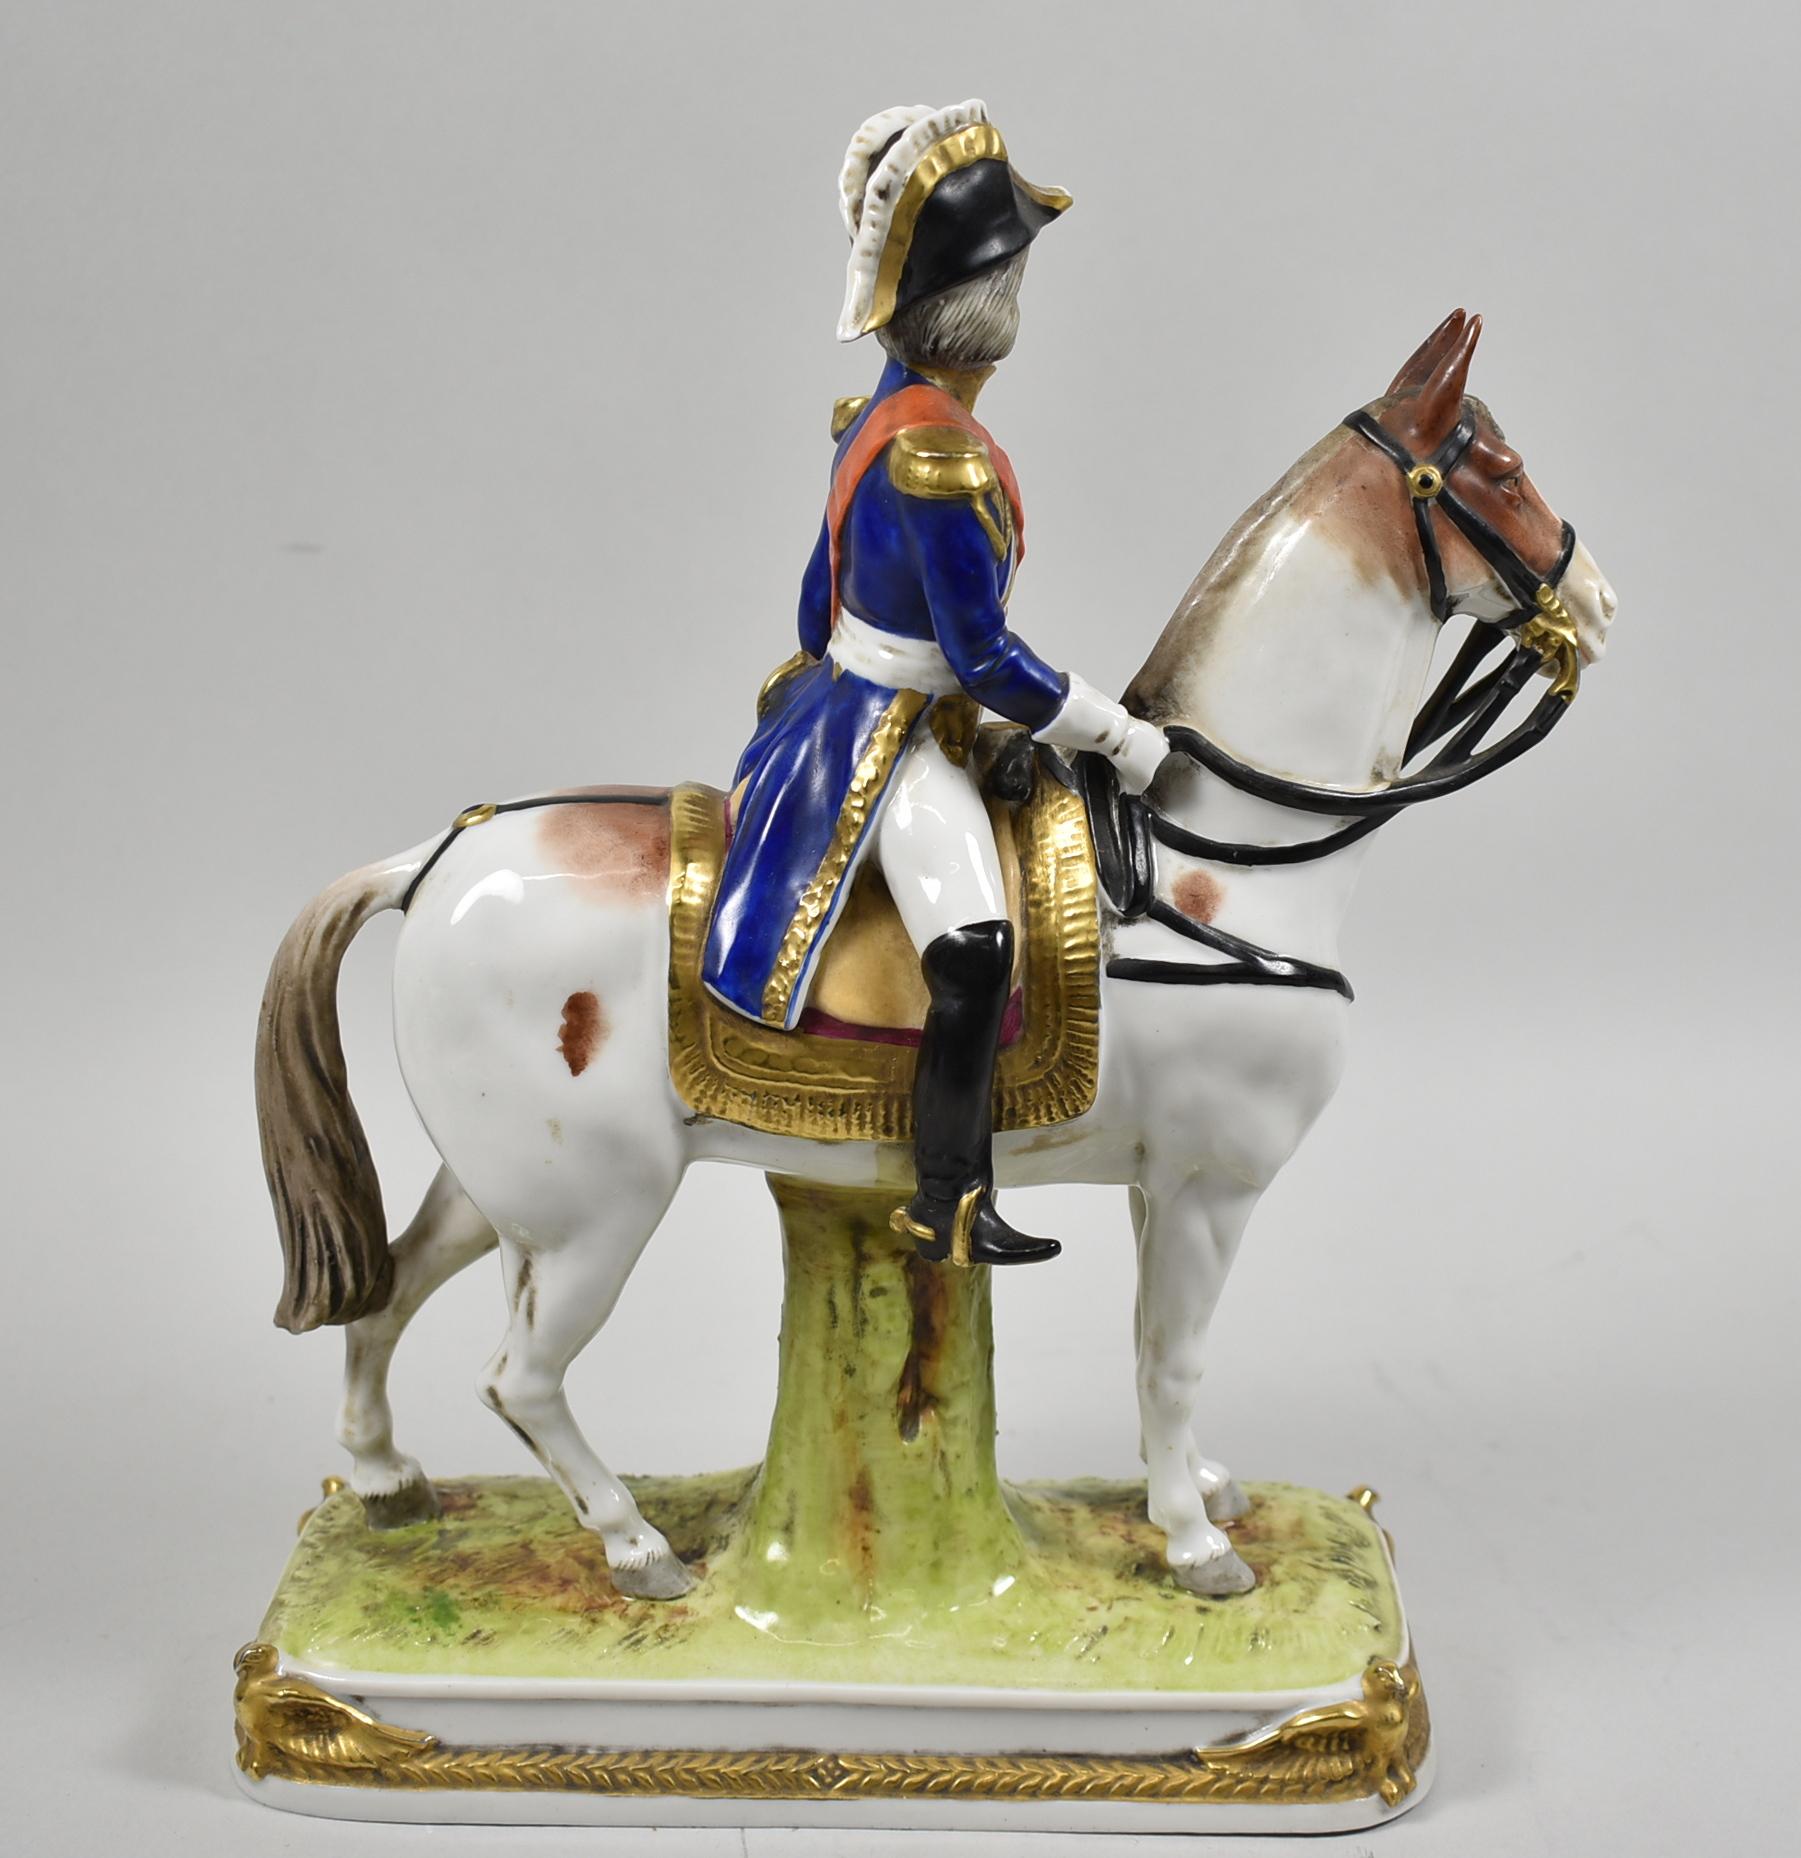 Soult Scheibe - Alsbach Germany porcelain general on horseback holding a spy glass. Gold birds on the corners. No damage. Dimensions: 3.5